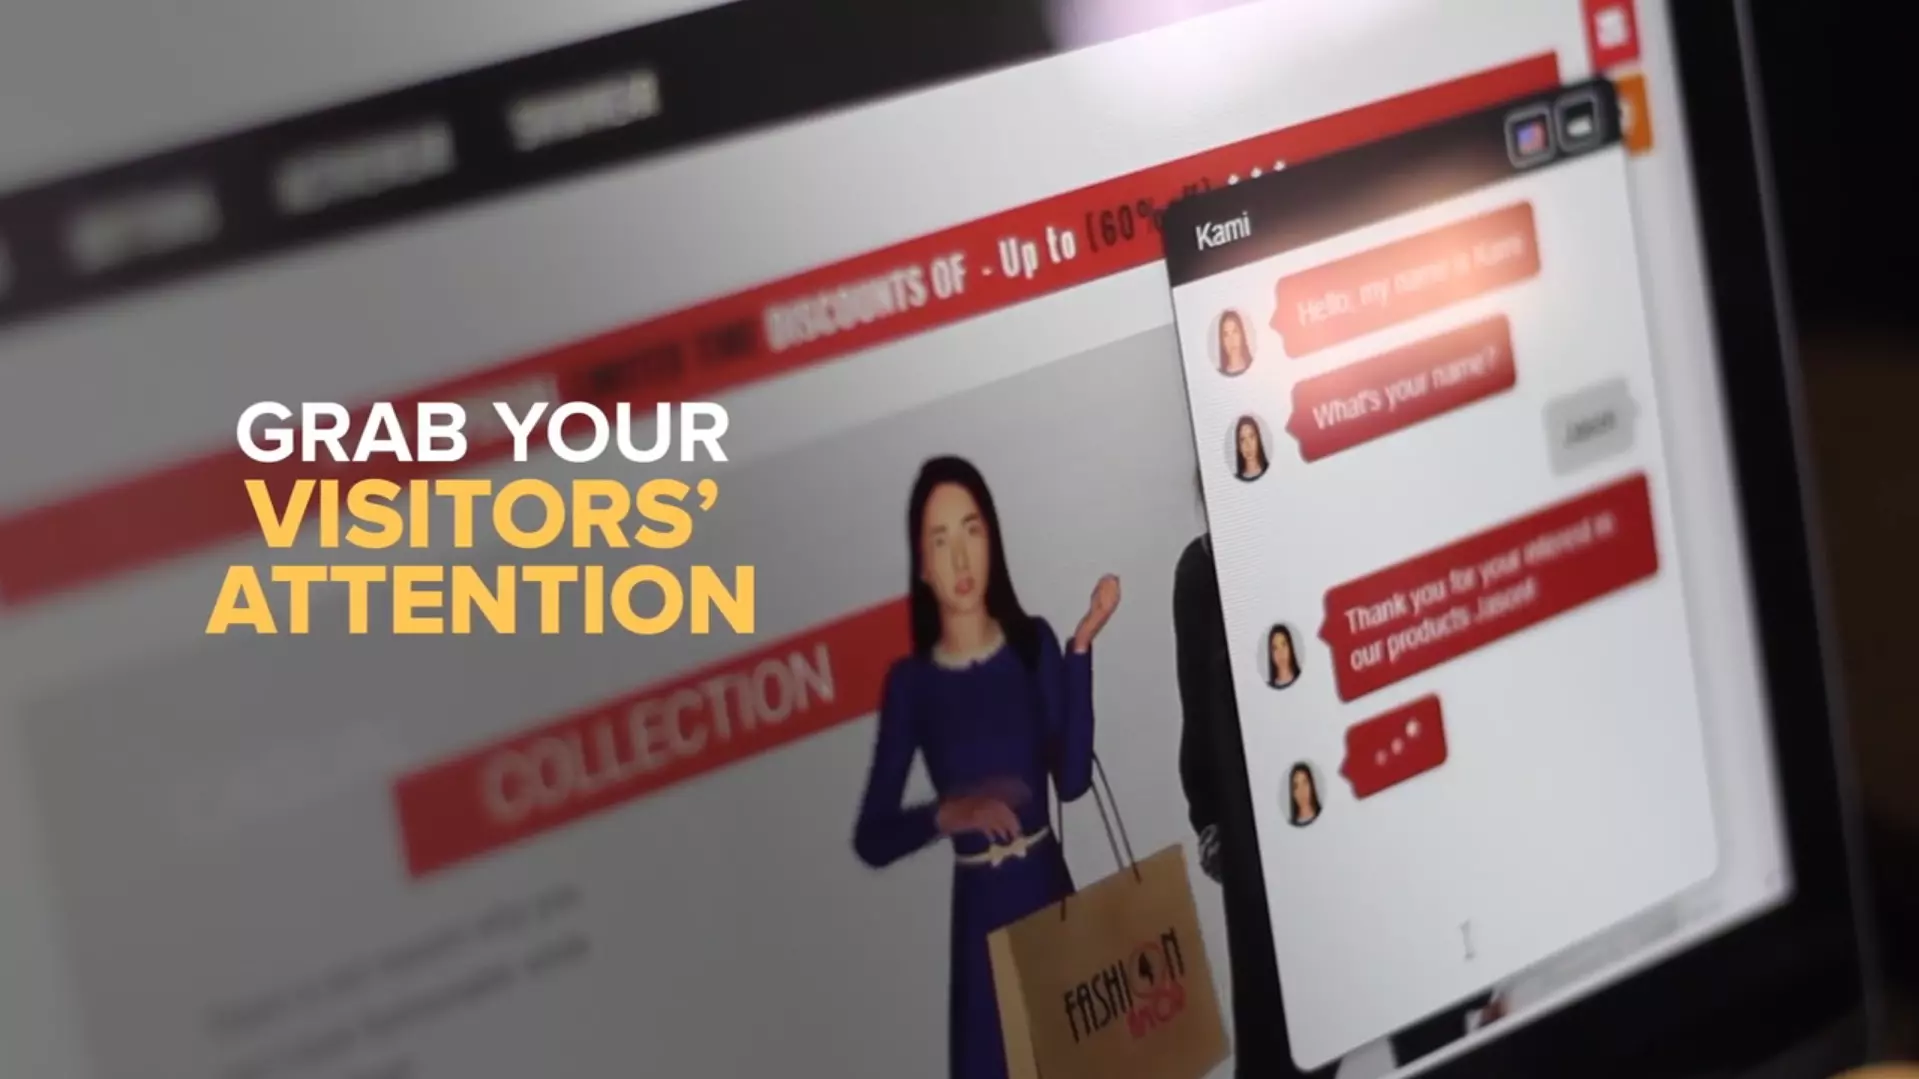 Captivate your visitors attention with Interactive Video Avatars & Live Chat Powered by Artificial Intelligence.